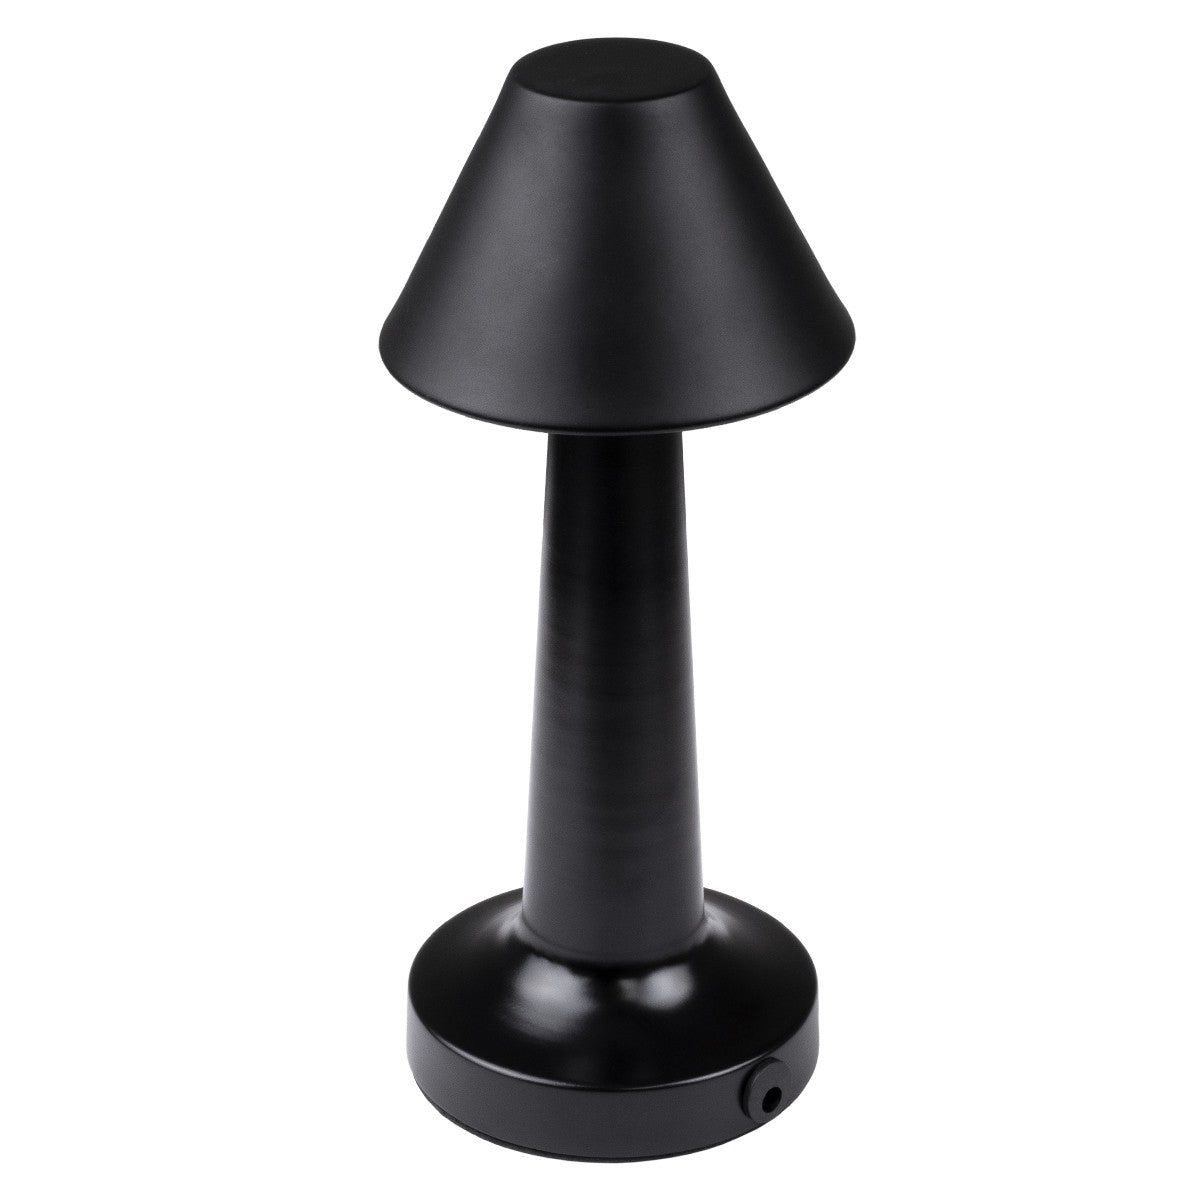 Molly Rechargeable Desk Lamp - Future Light - LED Lights South Africa